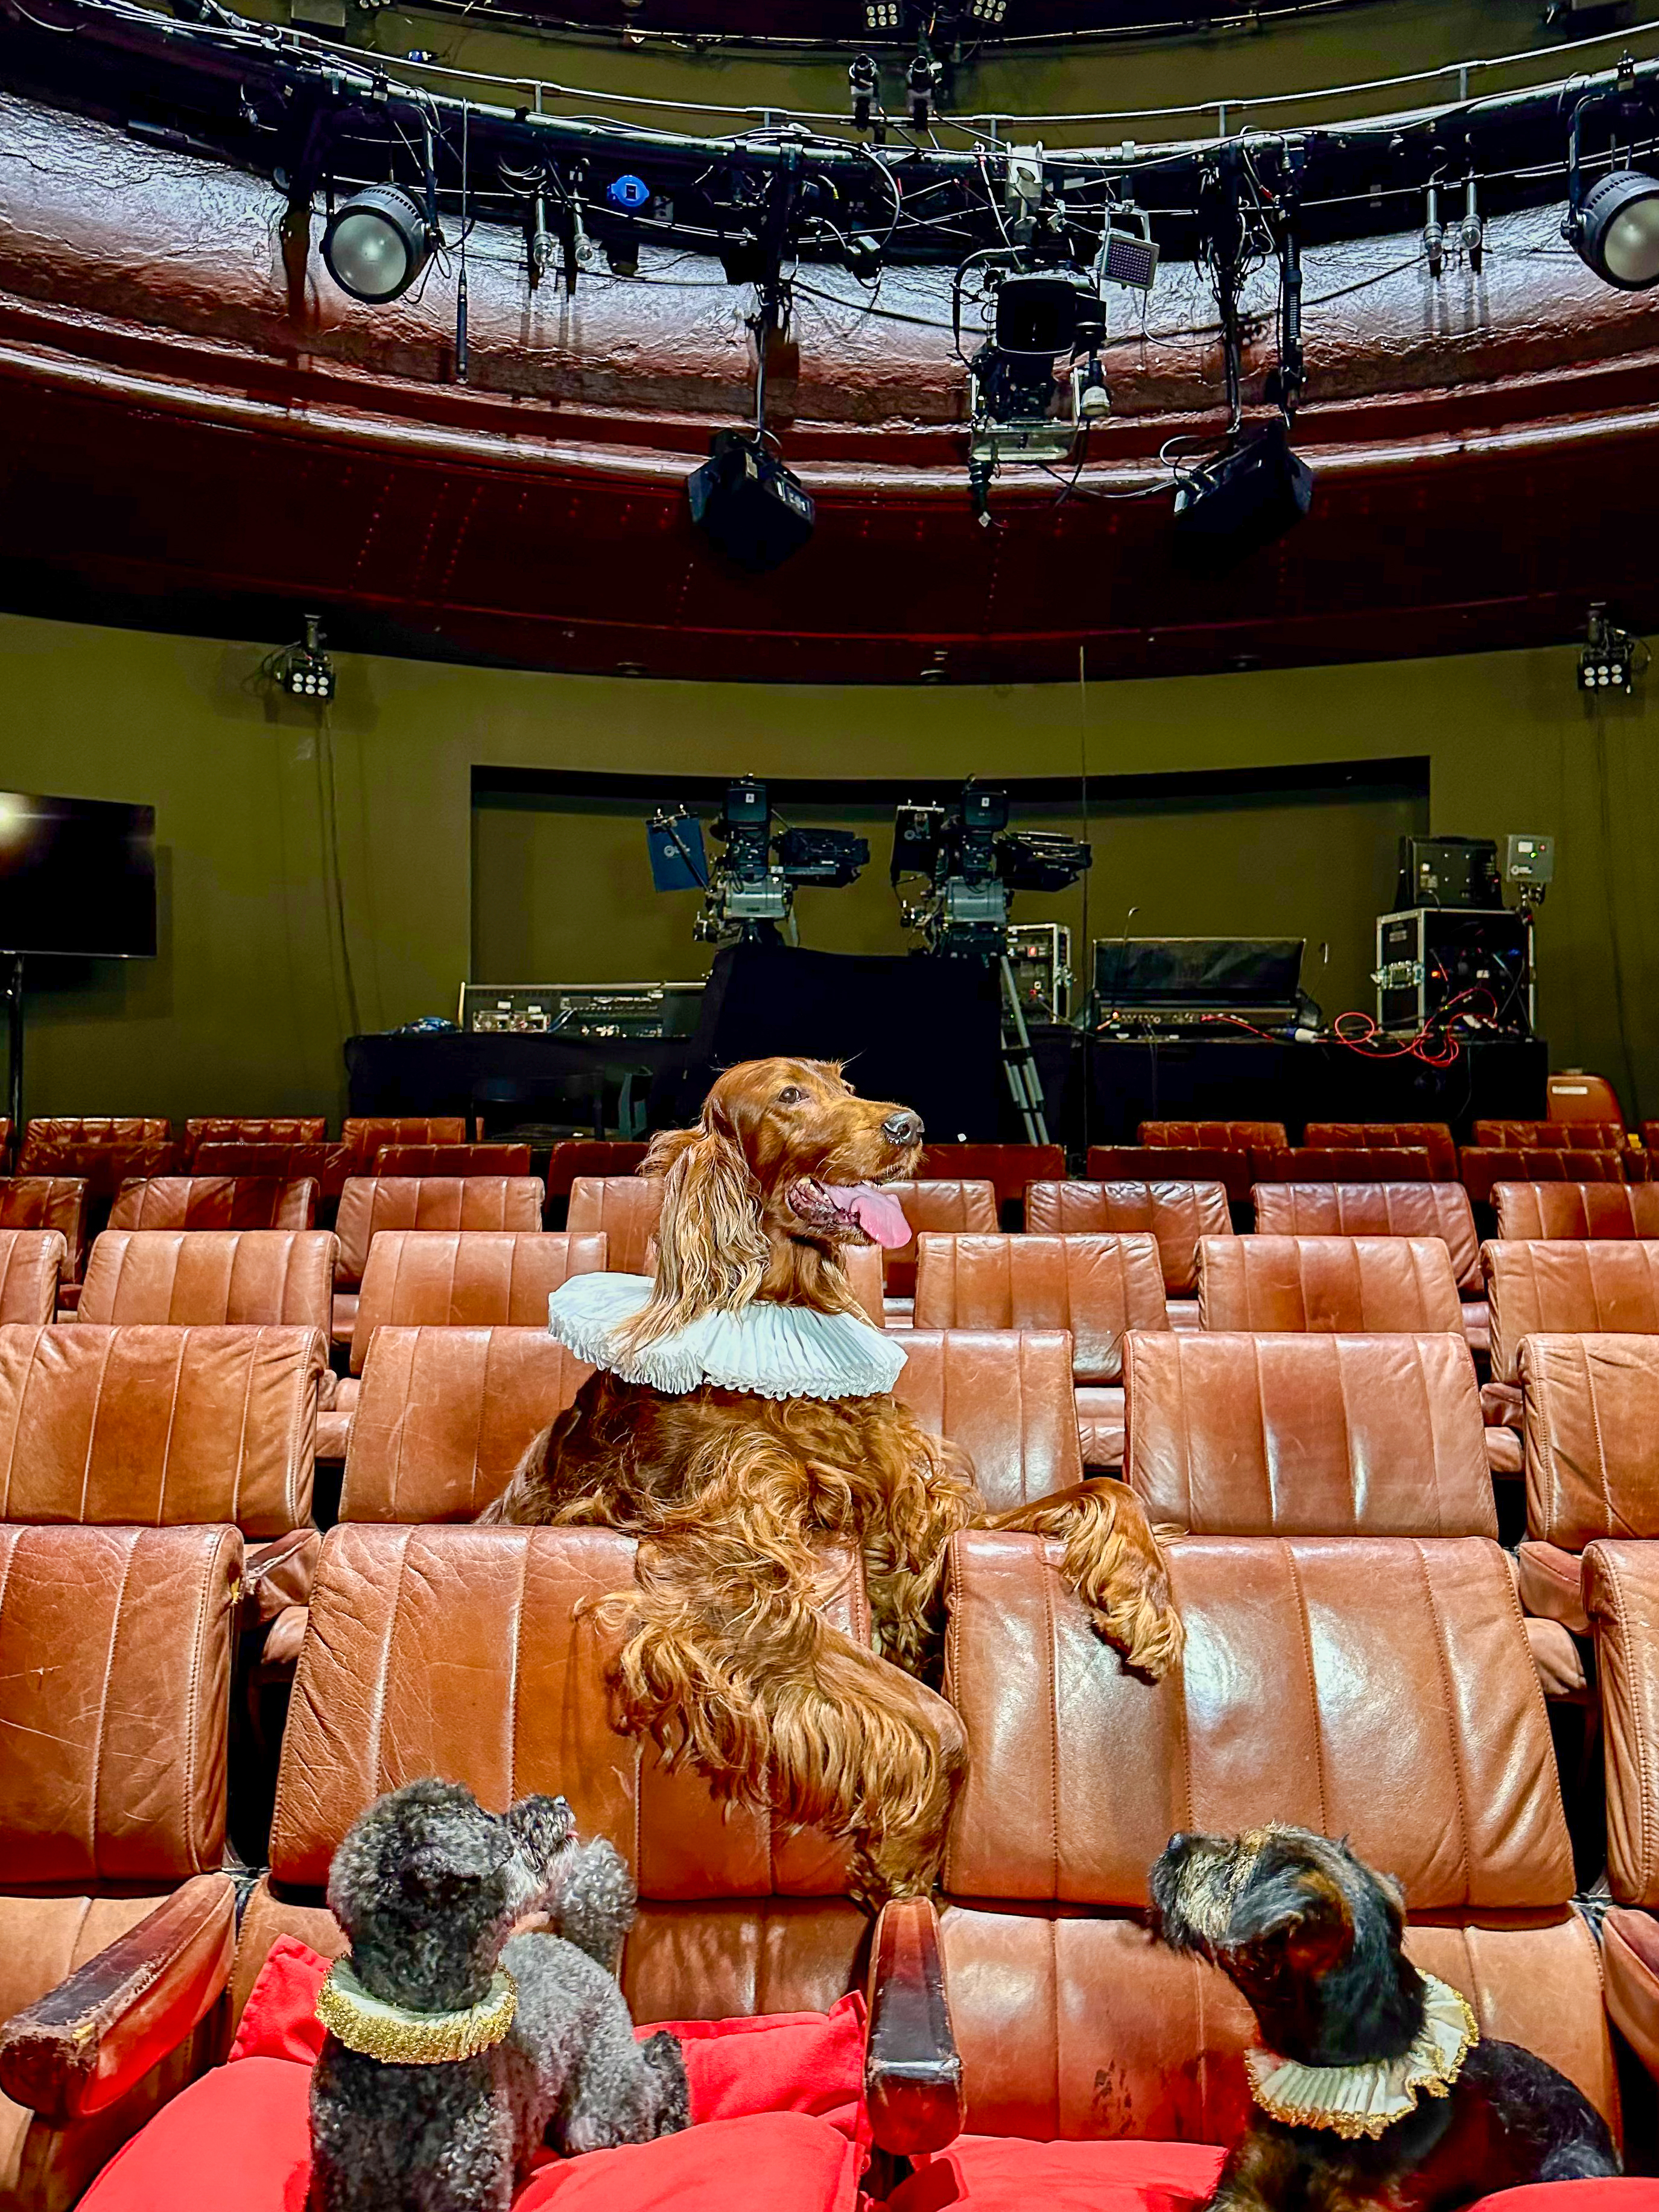 Bella the red setter, Better the border terrier and Heidi the toy poodle — all owned by Shakespeare’s Globe theatre staff — toured some of London’s theatres, complete with ruffs, in celebration of World Theatre Day